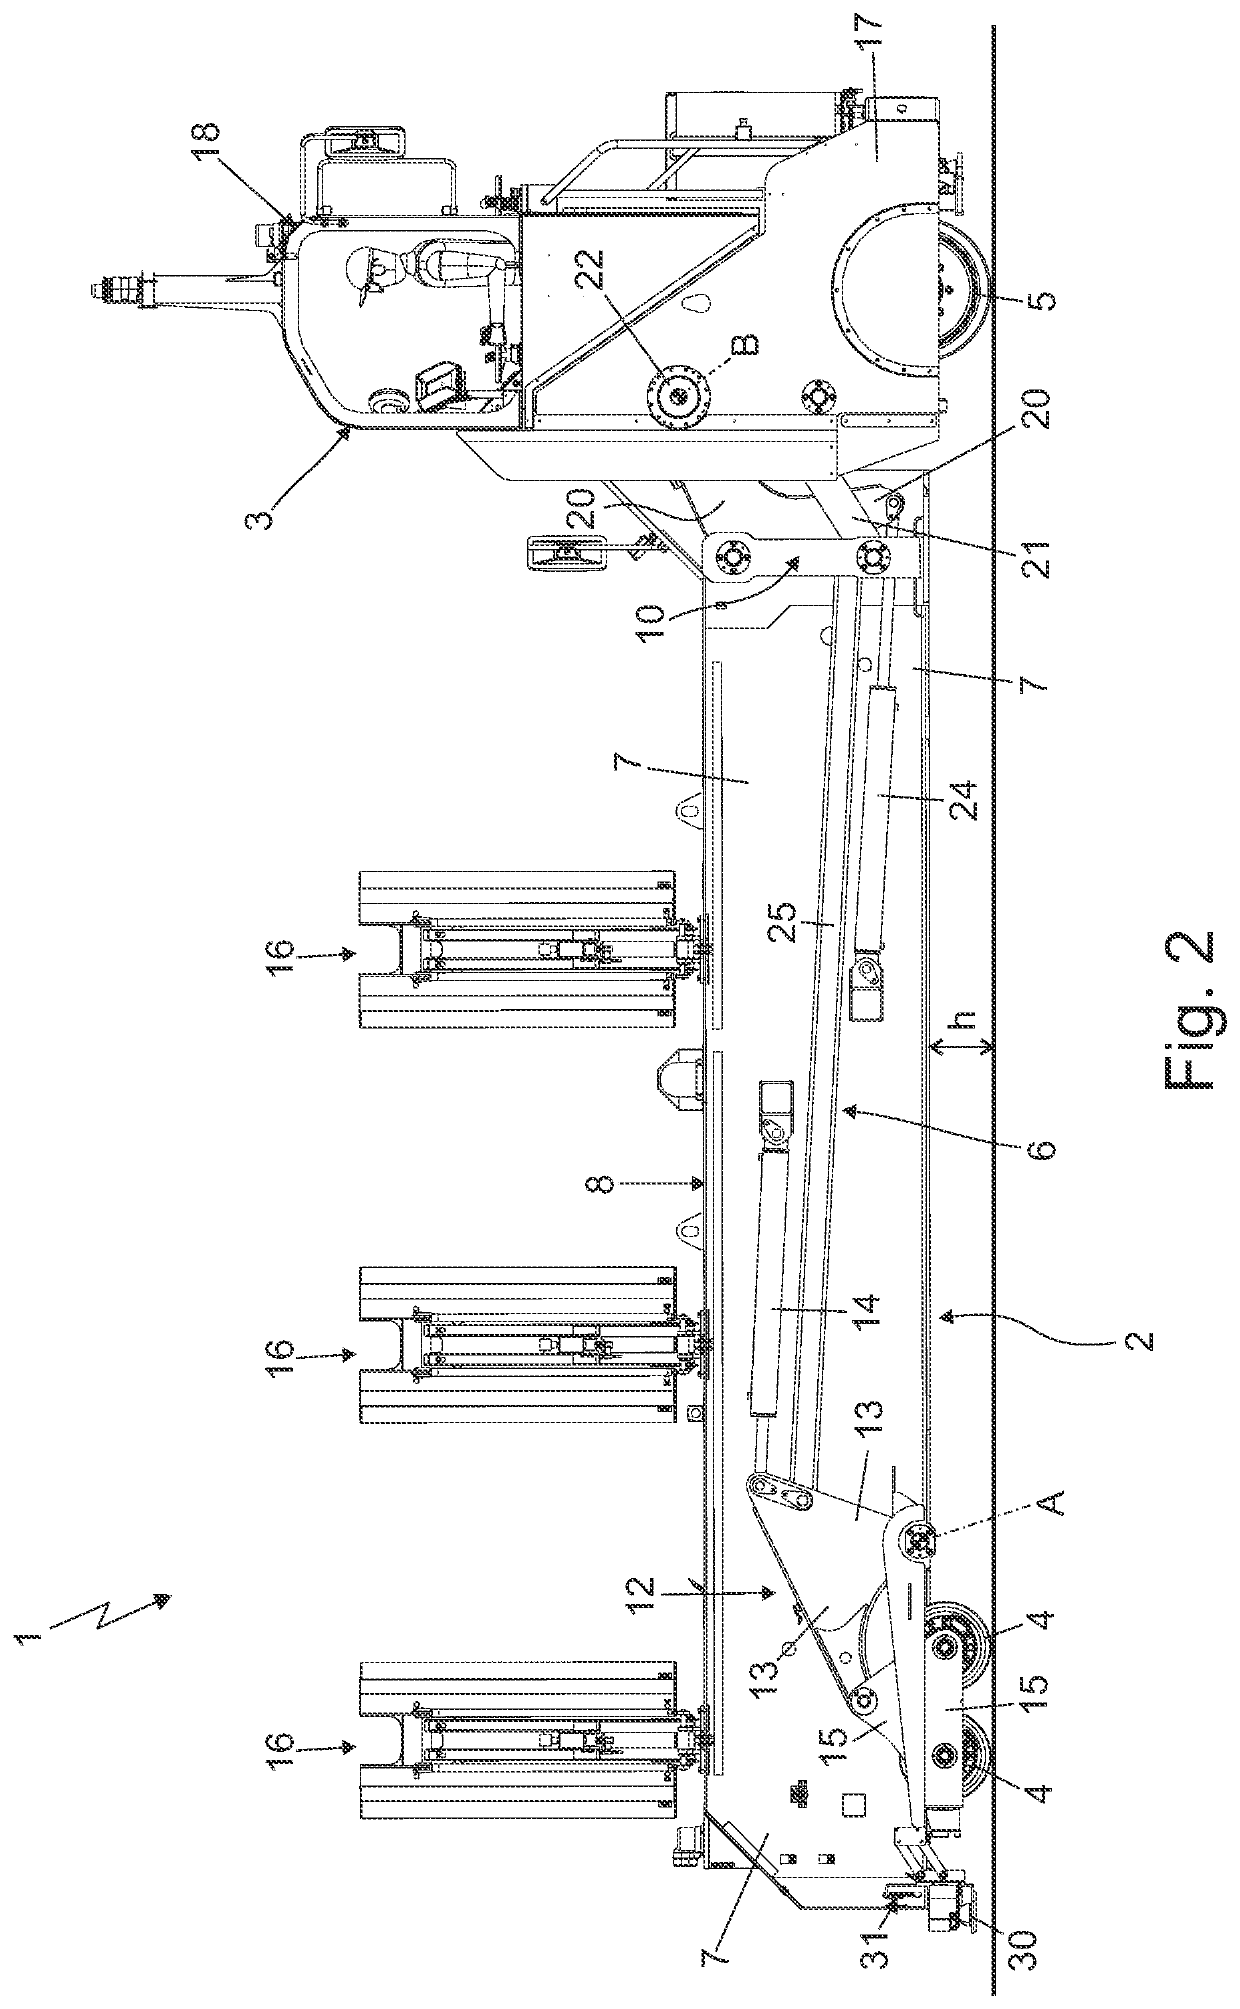 Self-propelled vehicle for handling glass-sheet supporting racks